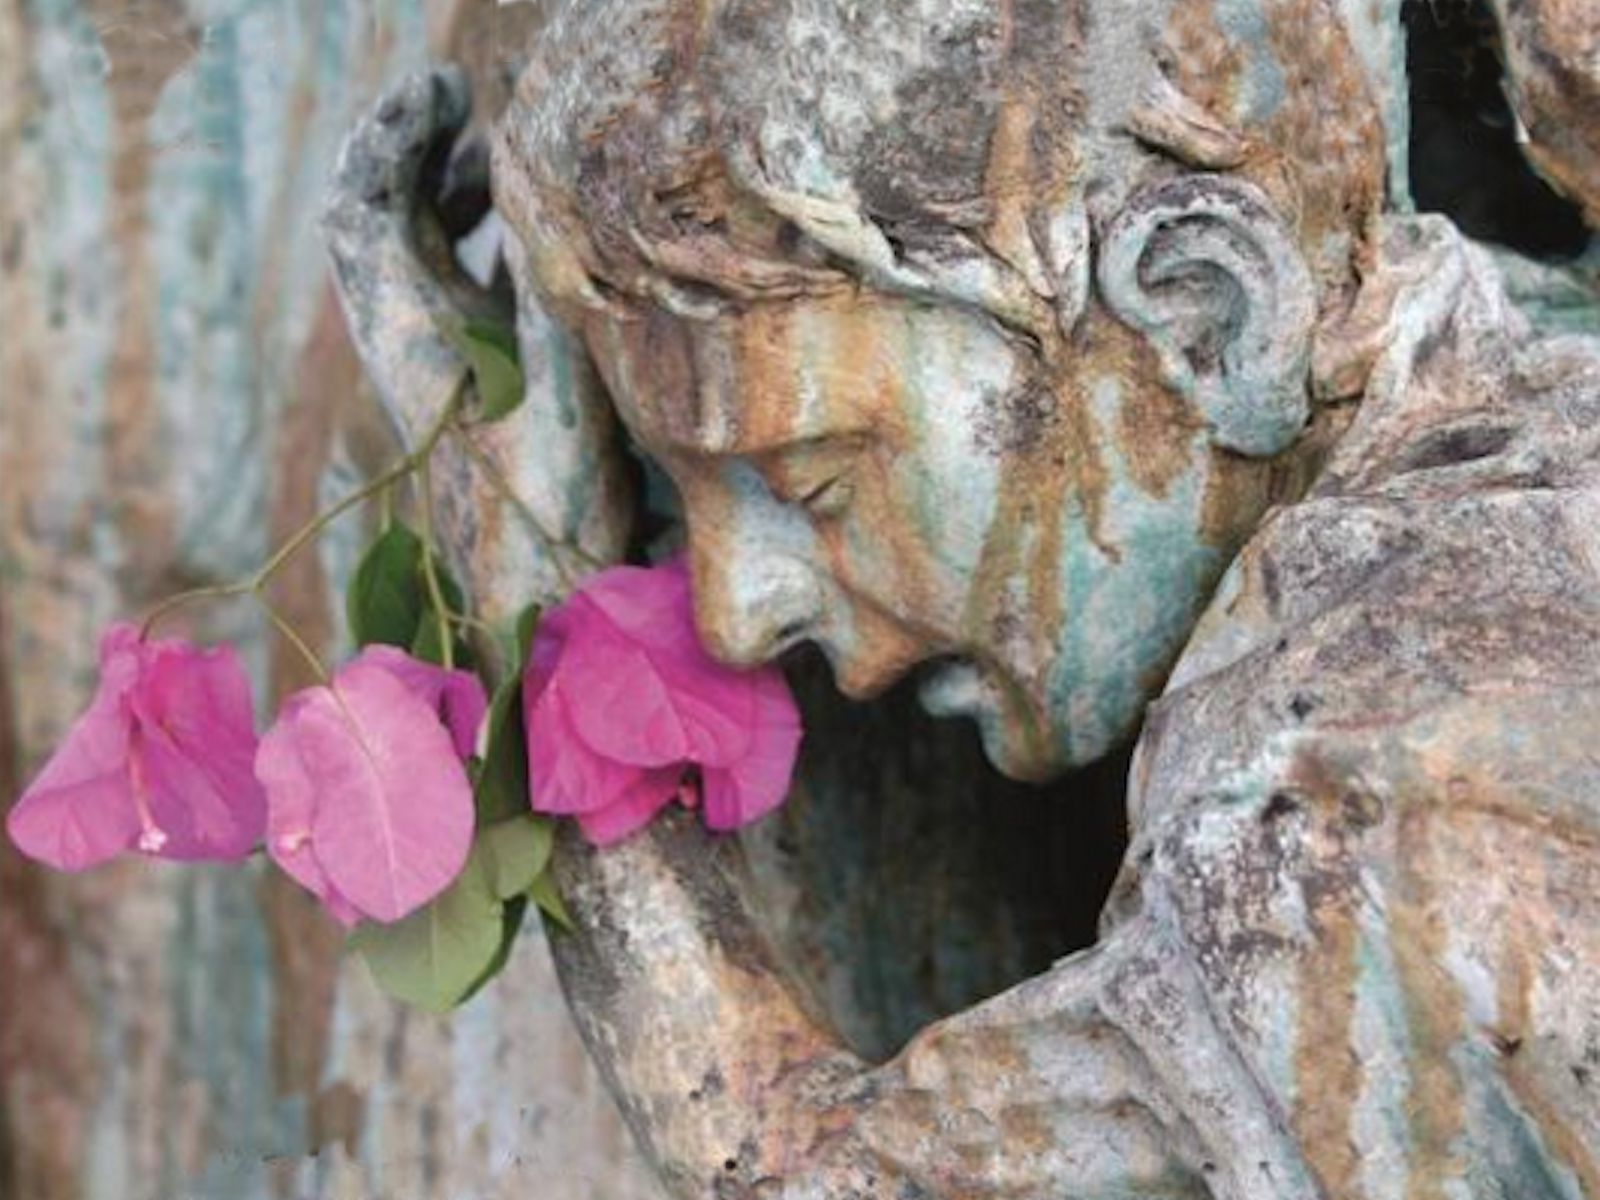 statue of boy holding pink flowers